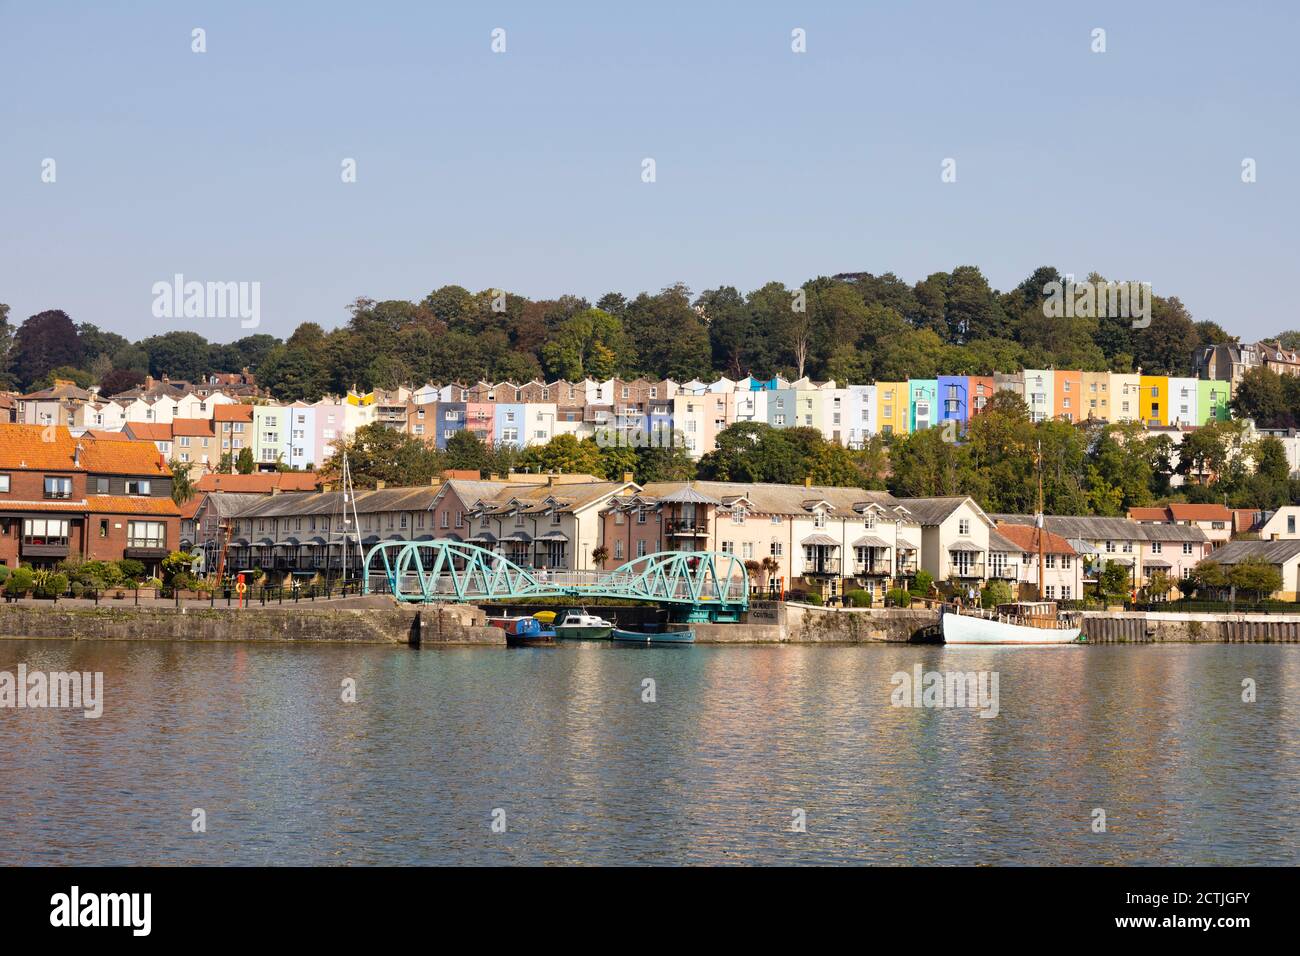 Coloured houses on Cliftonwood Crescent and Old School Lane behind Pooles Wharf Marina. Bristol, England. Sept 2020 Stock Photo